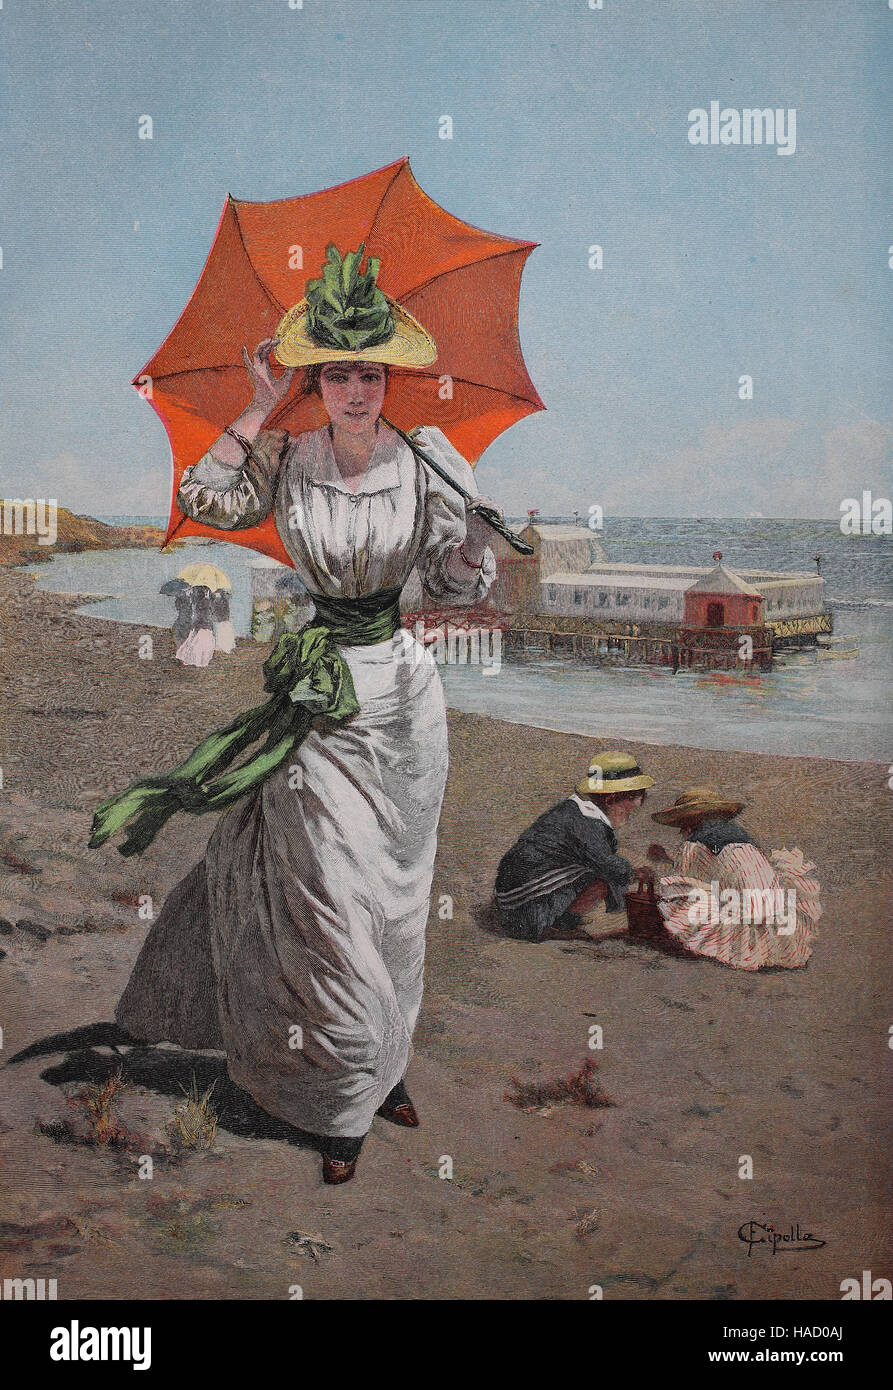 Elegant woman on the beach of the Baltic Sea, Germany, with umbrella, illustration published in 1880 Stock Photo